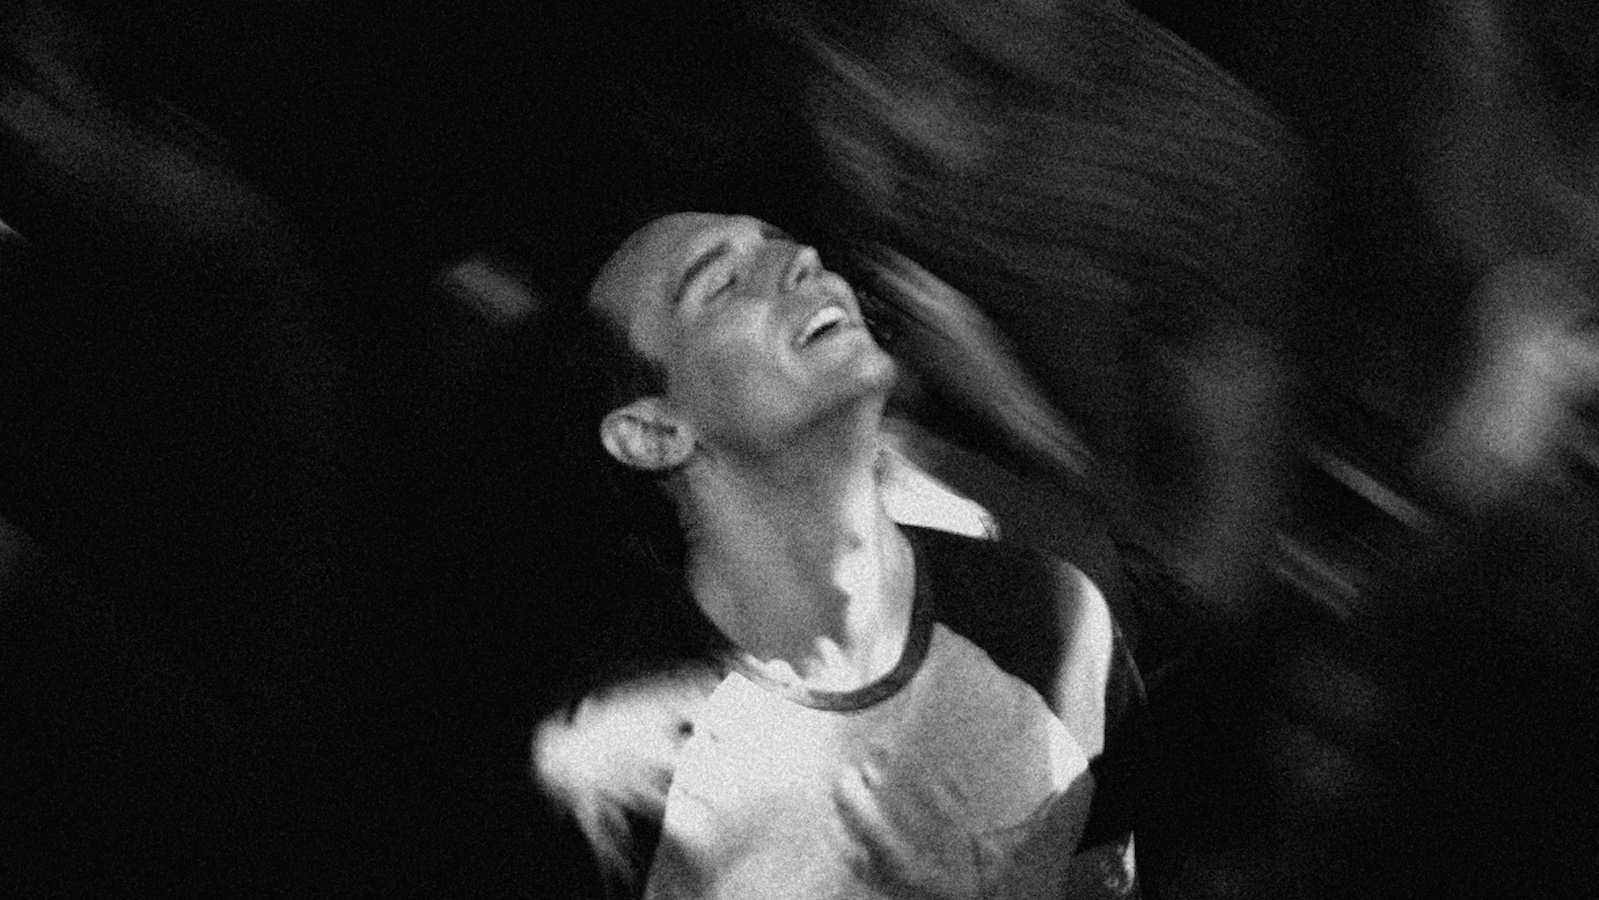 A black and white image of a young man looking up and ecstatically dancing